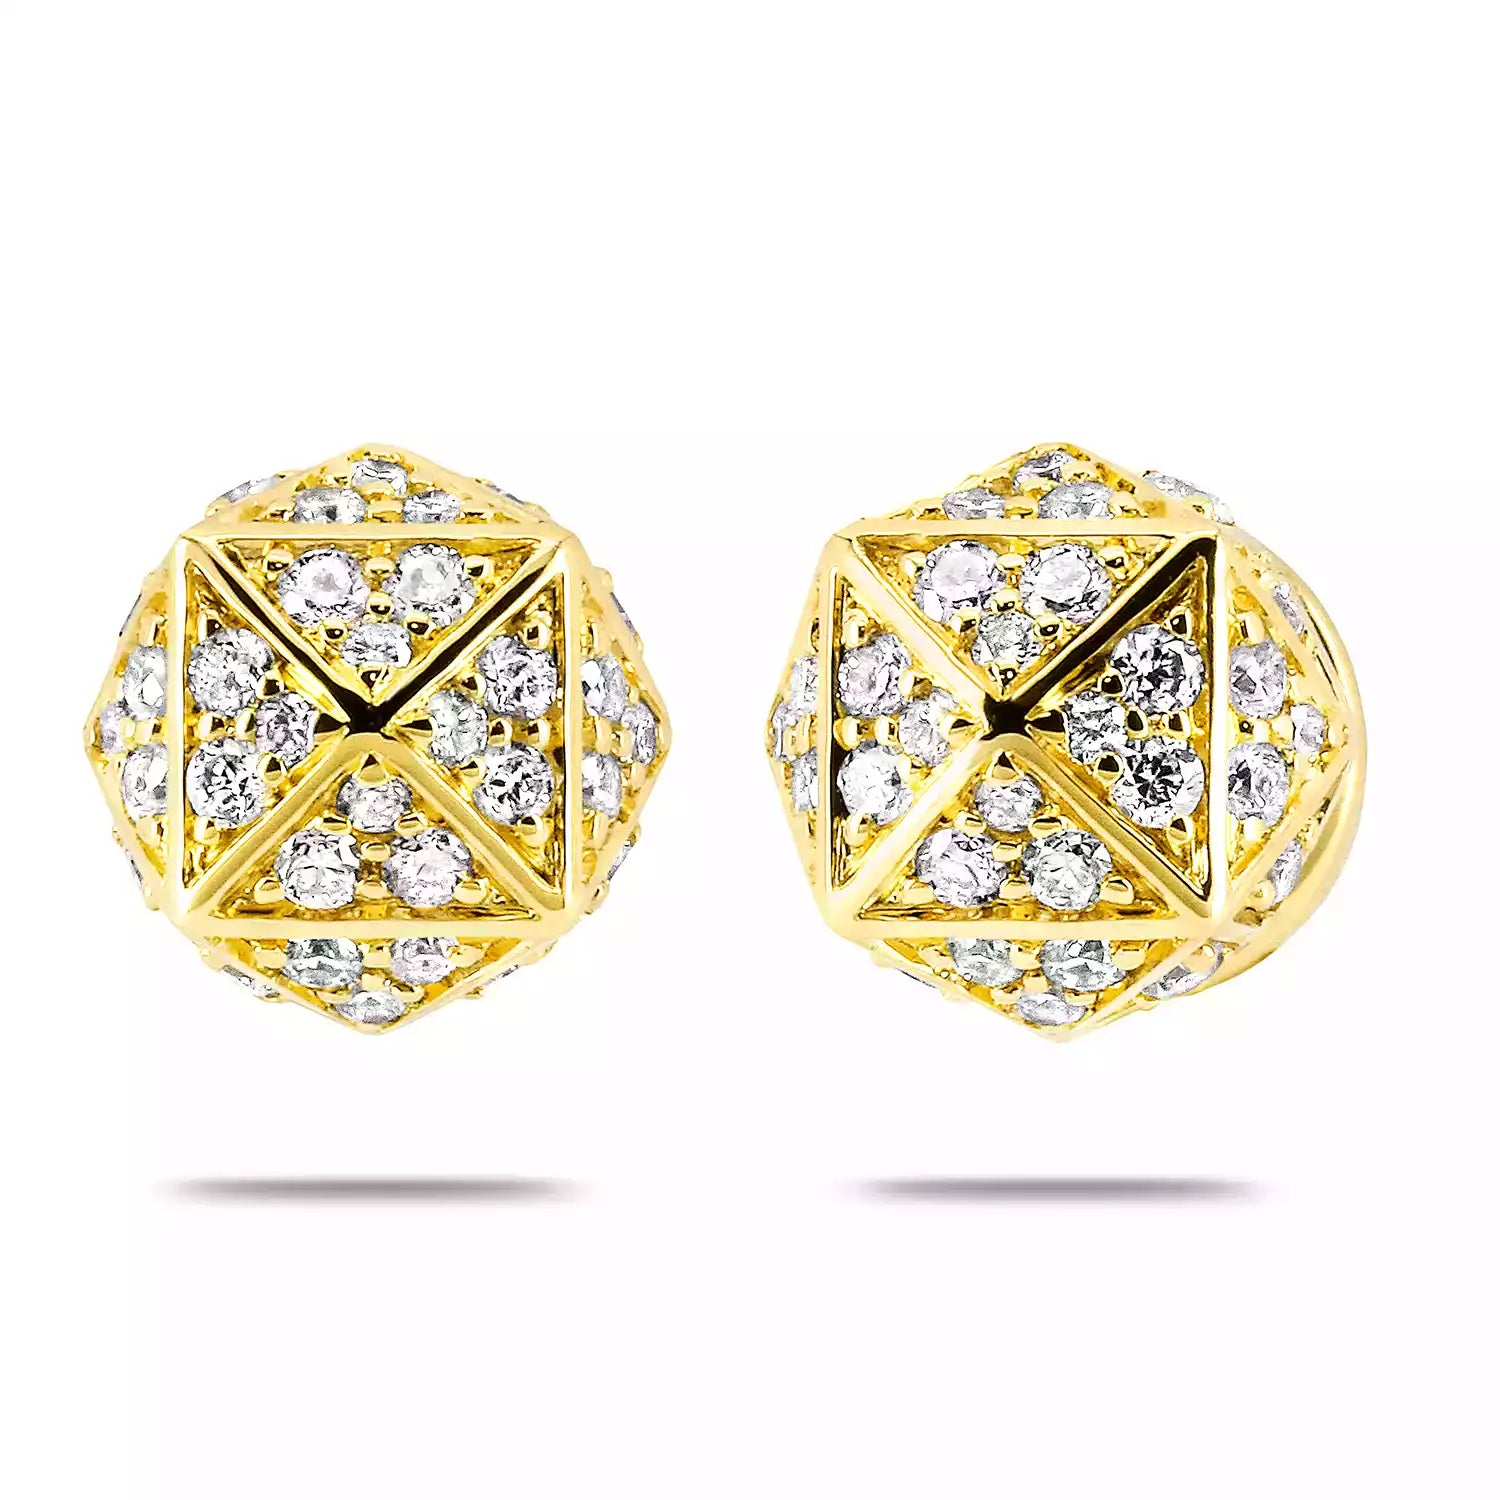 Gold 18KT with 64 Diamonds 0.29ct